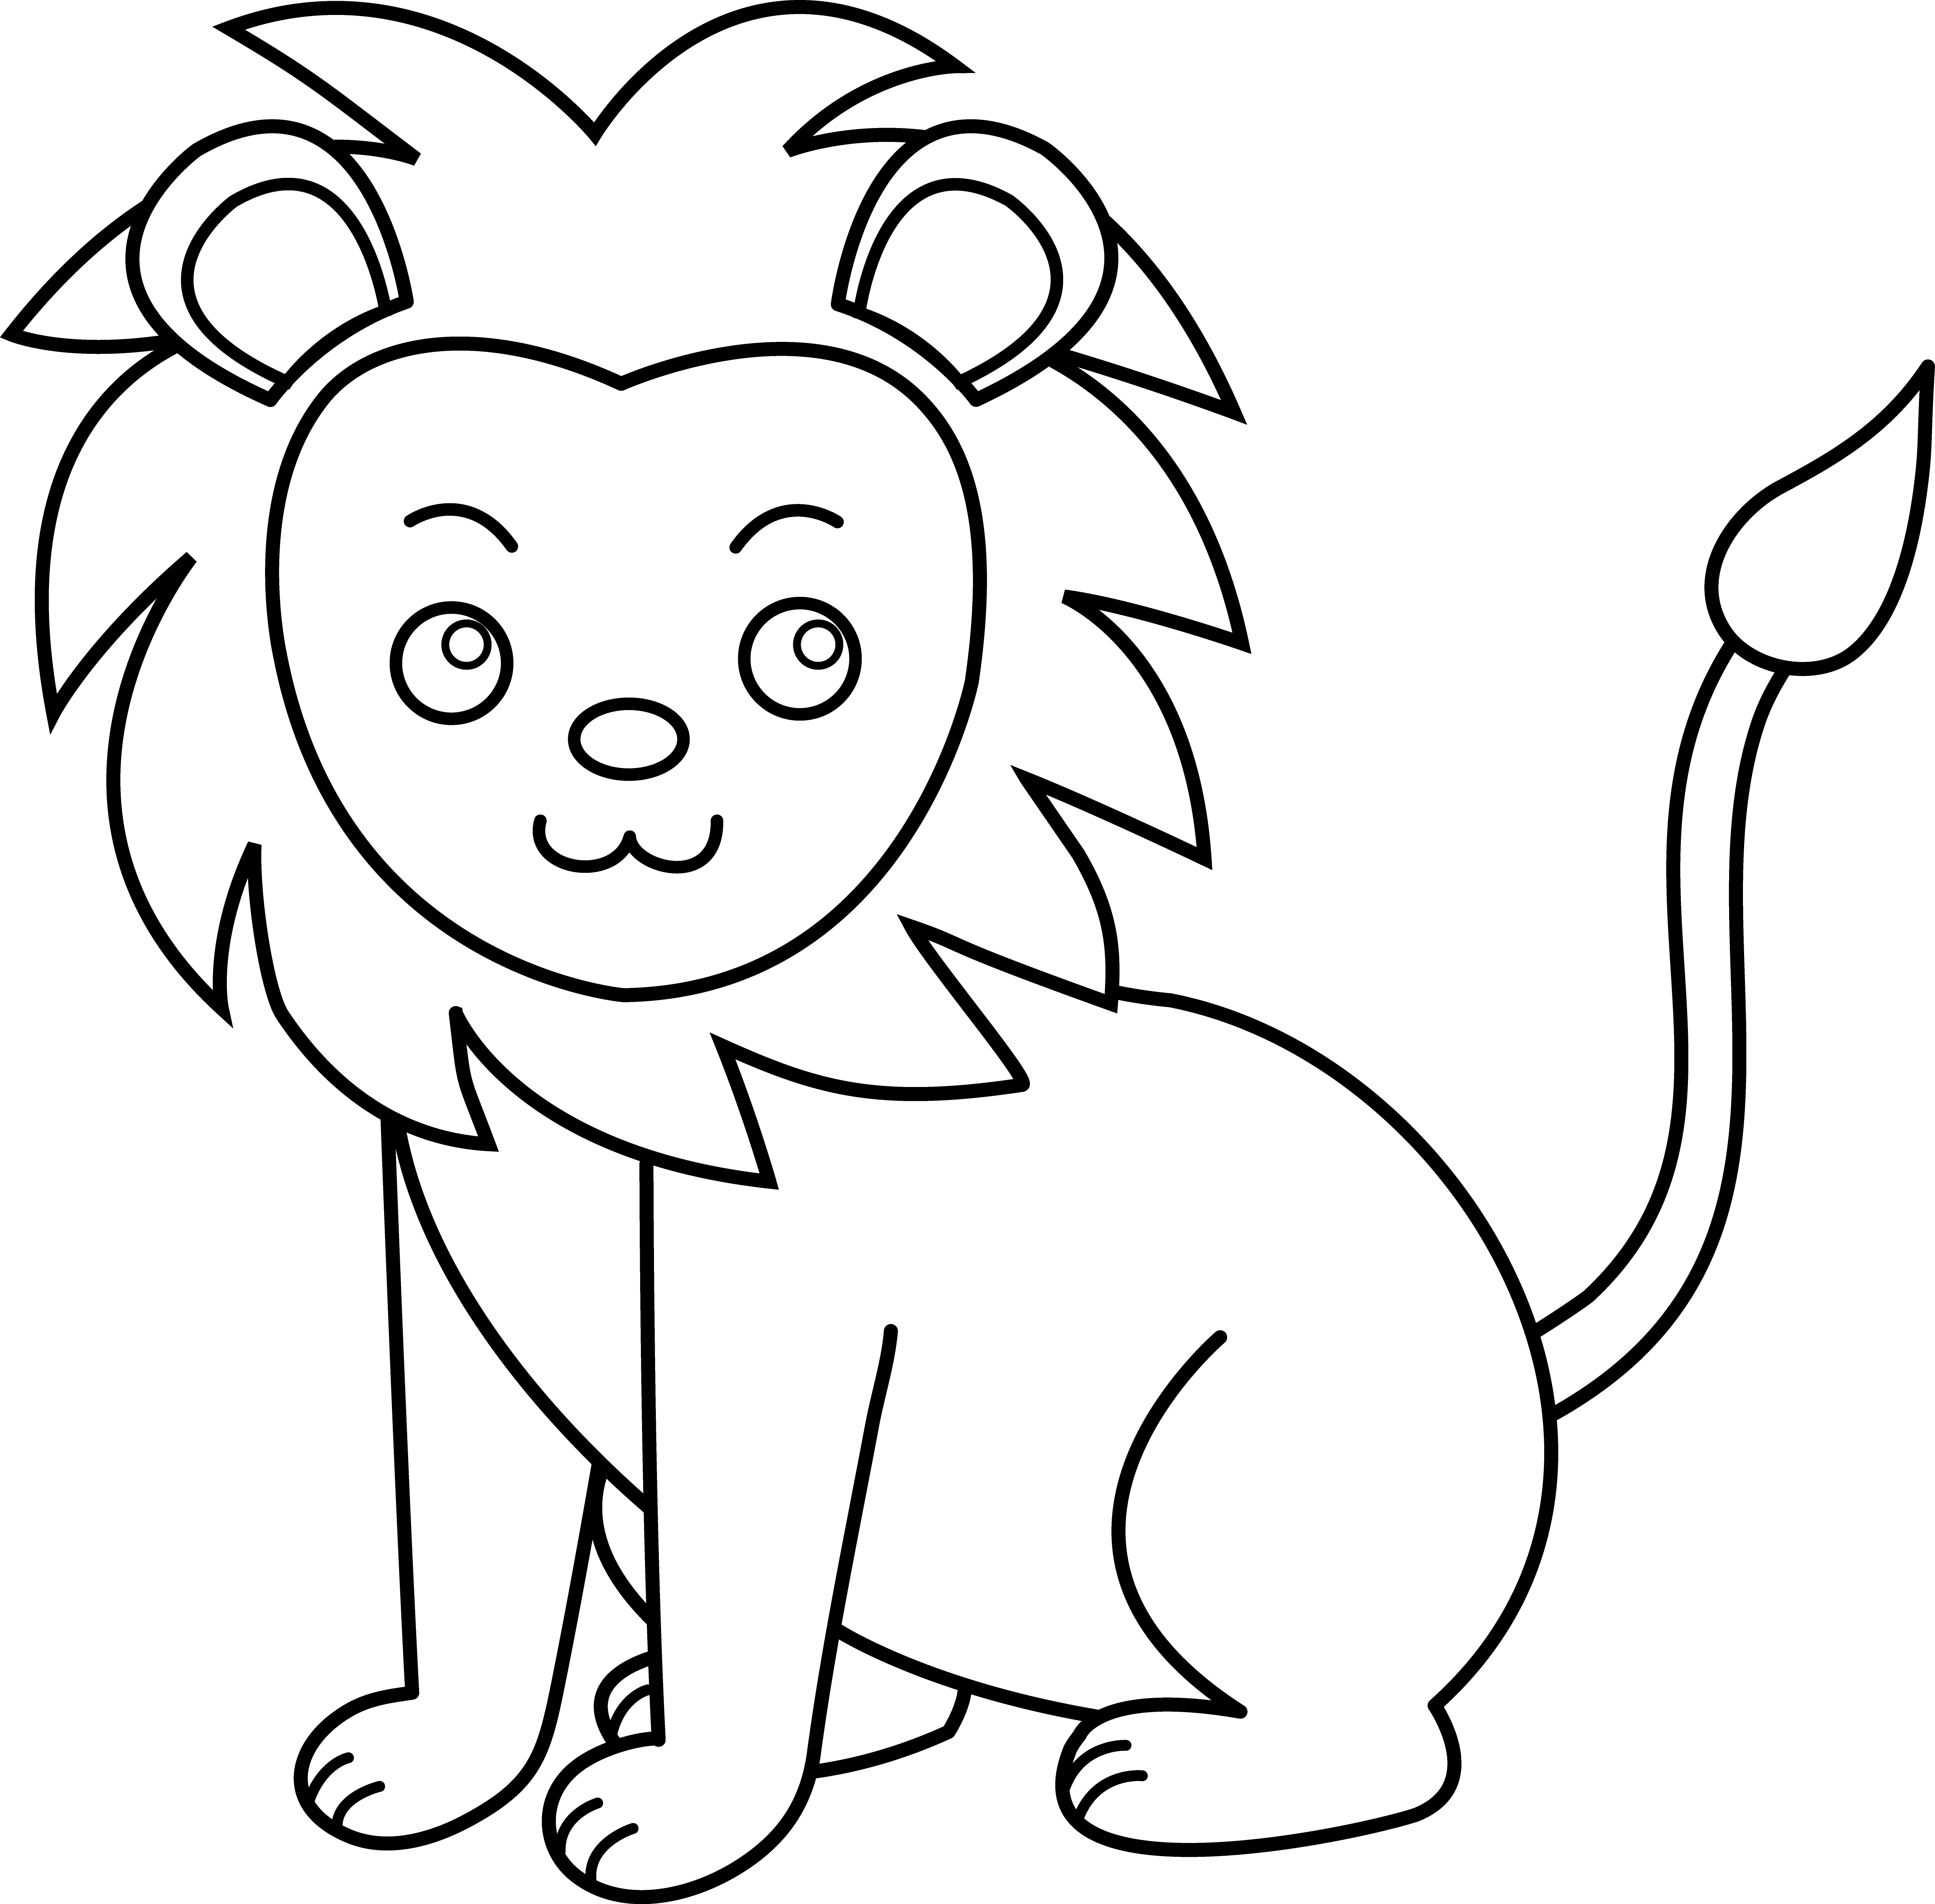  collection of cute. Clipart lion black and white